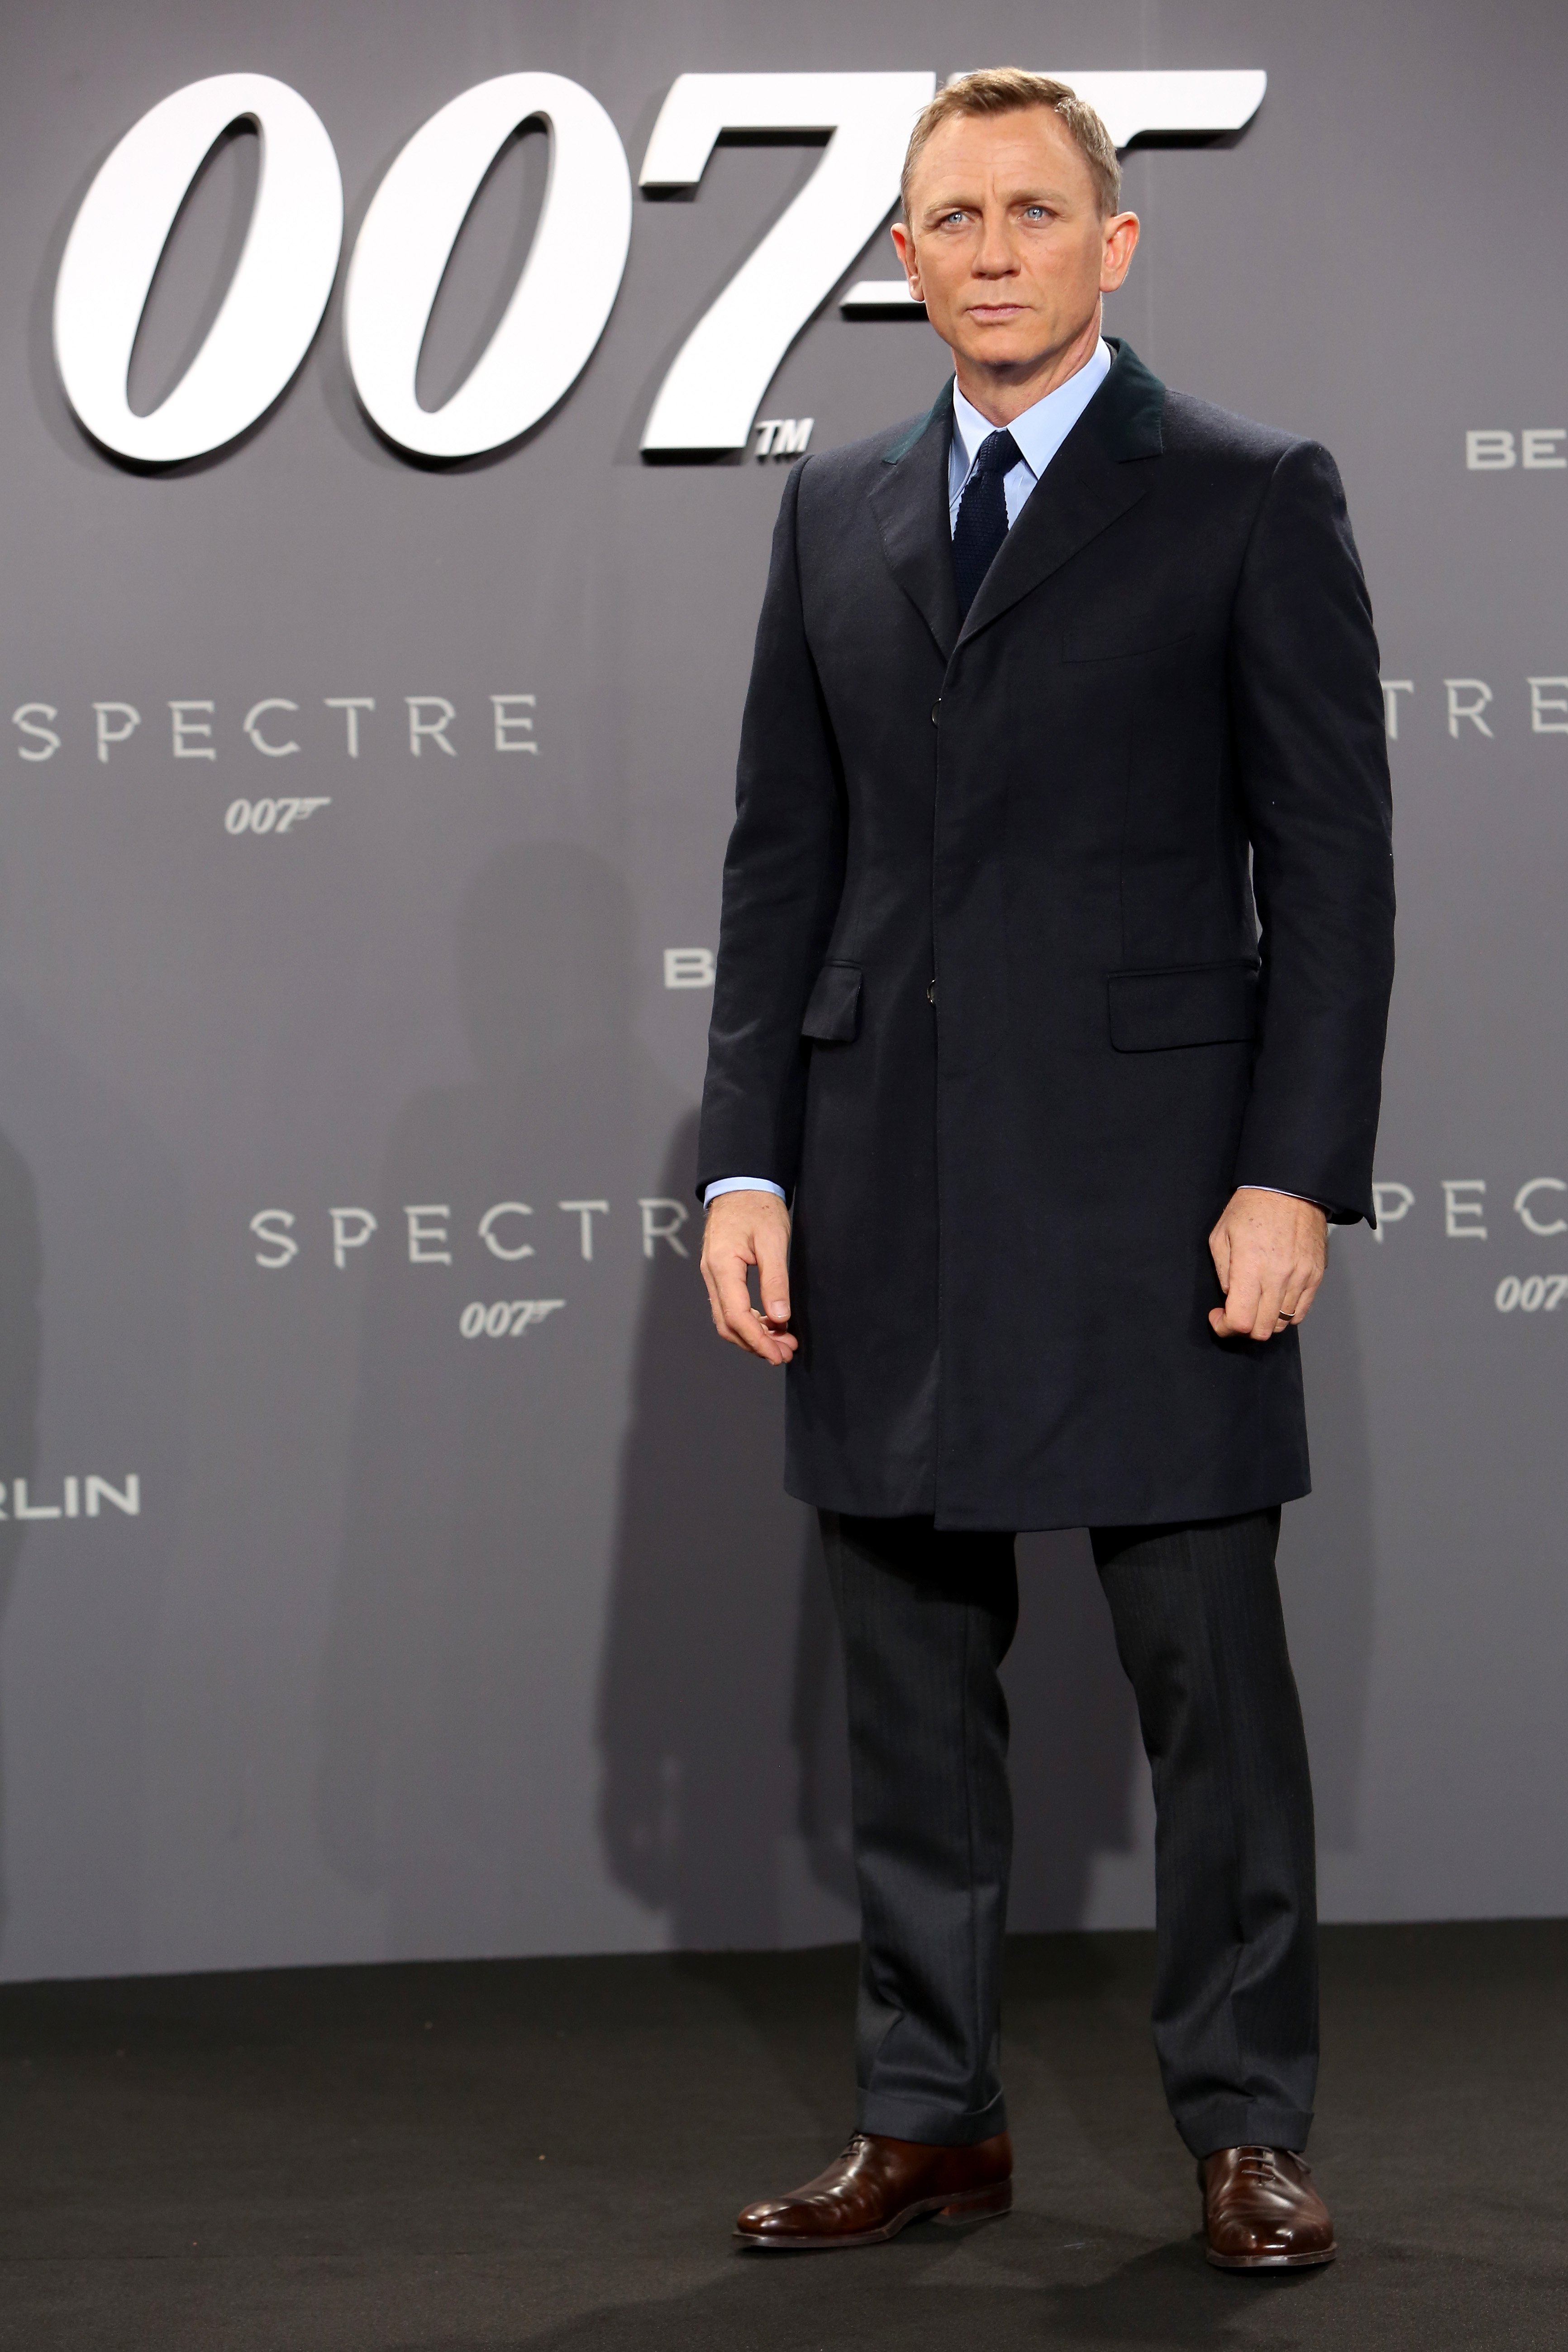 Actor Daniel Craig attends the German premiere of the new James Bond movie 'Spectre' at CineStar on October 28, 2015 in Berlin, Germany. | Source: Getty Images